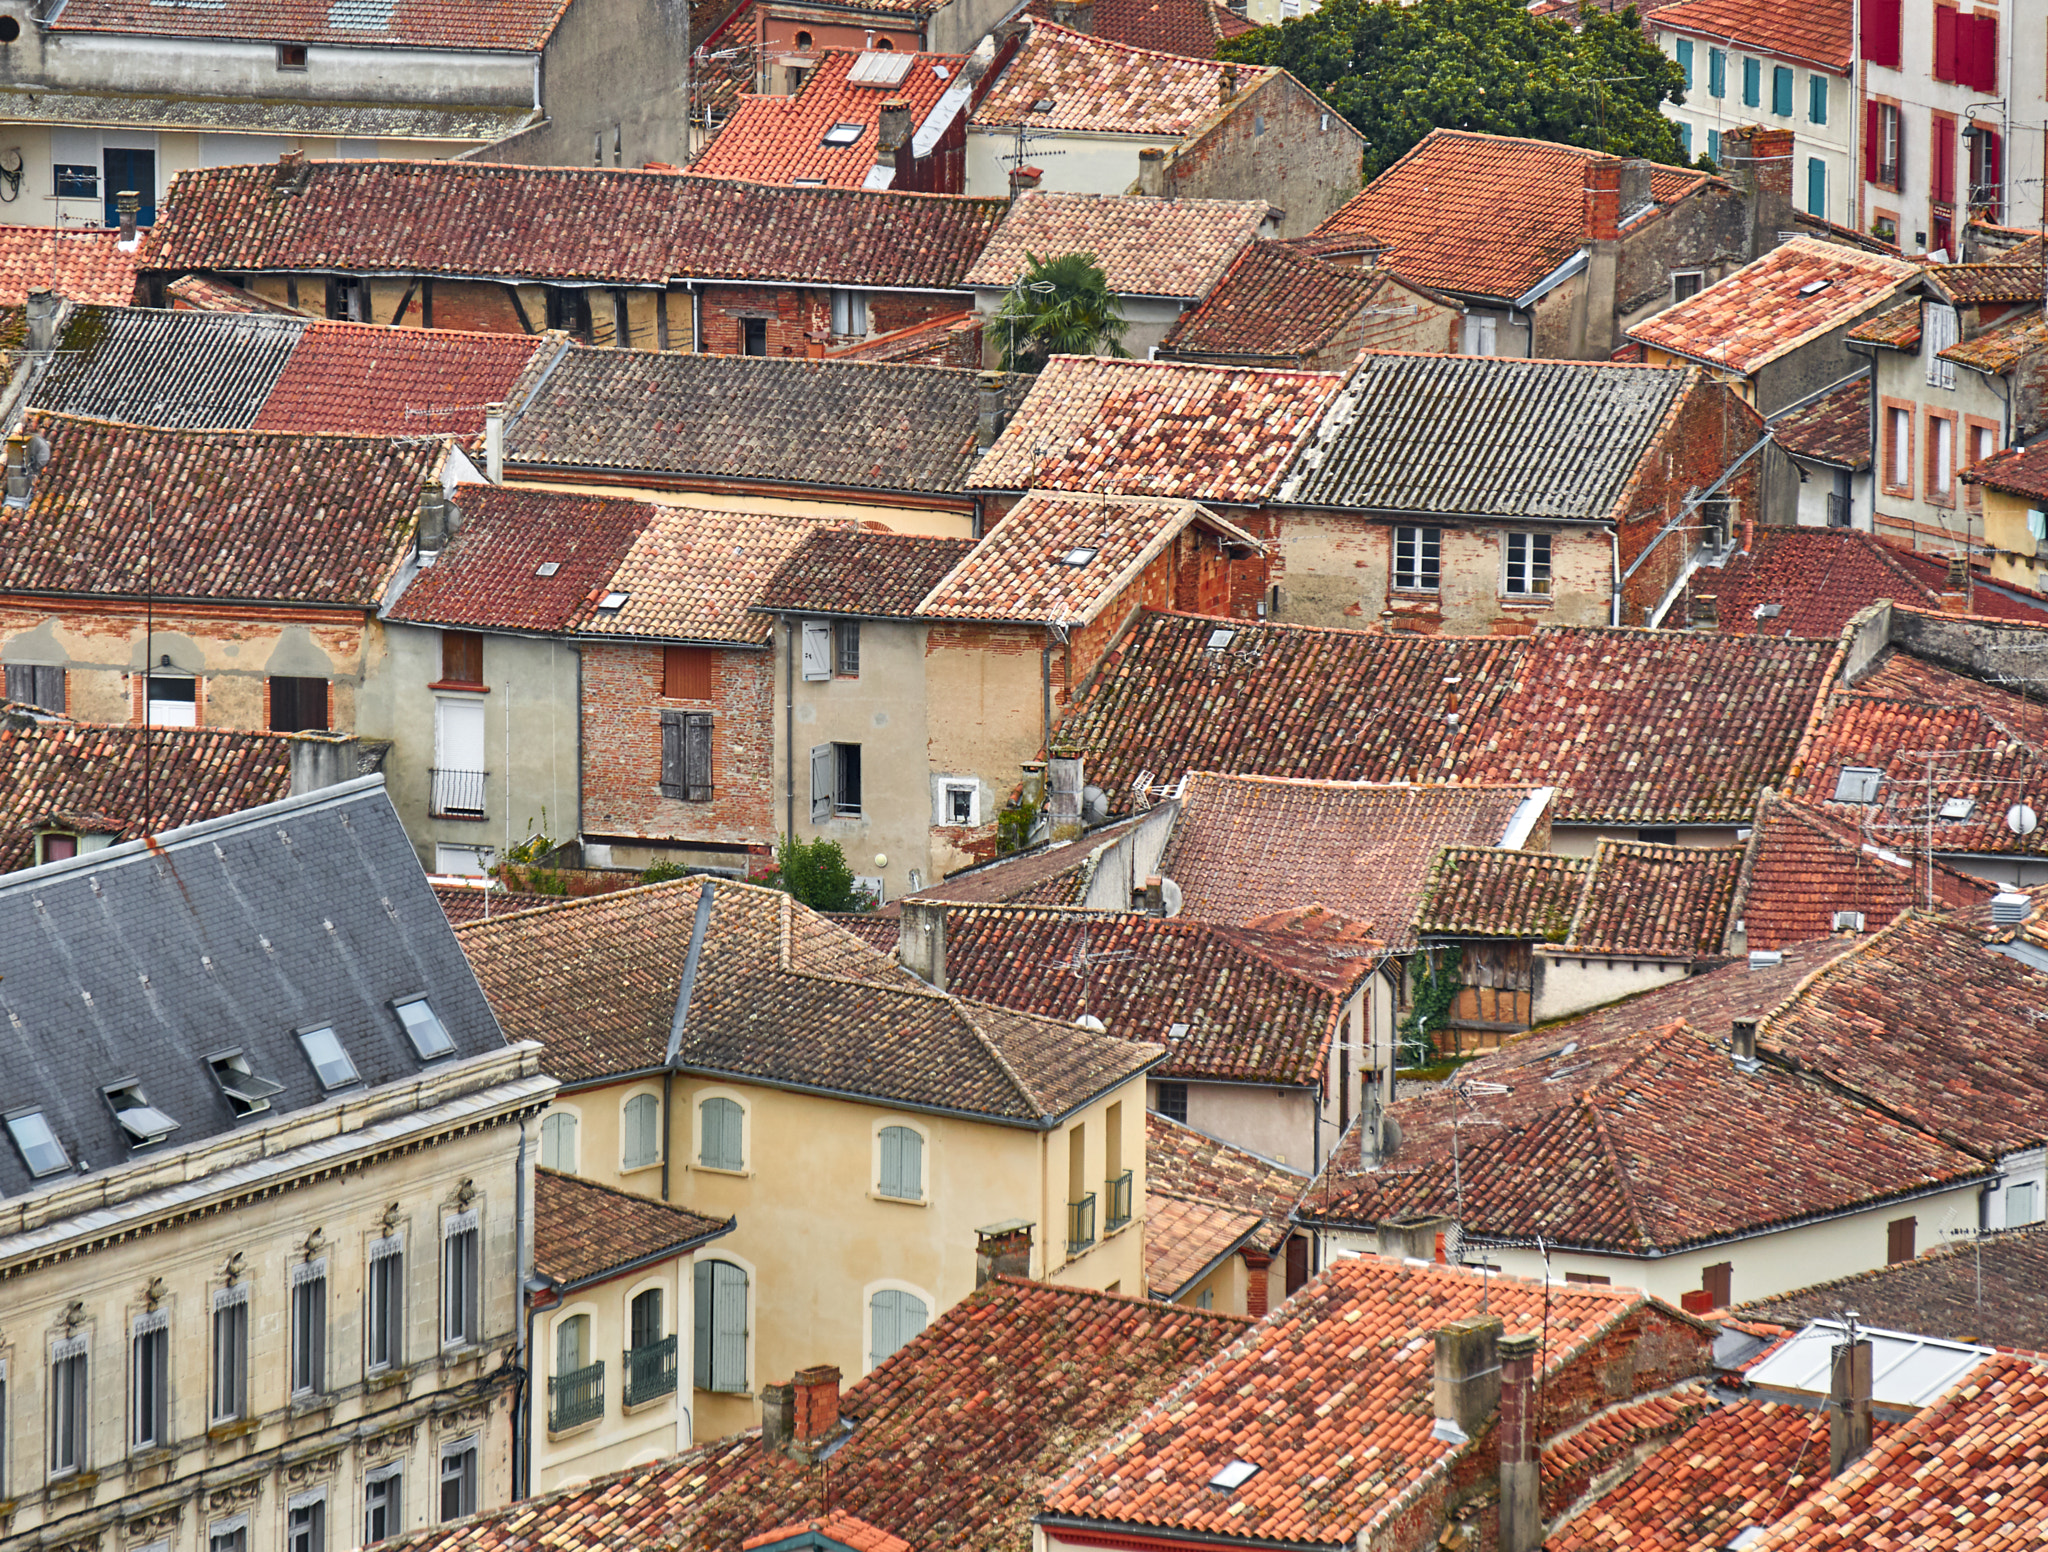 The roofs of Moissac